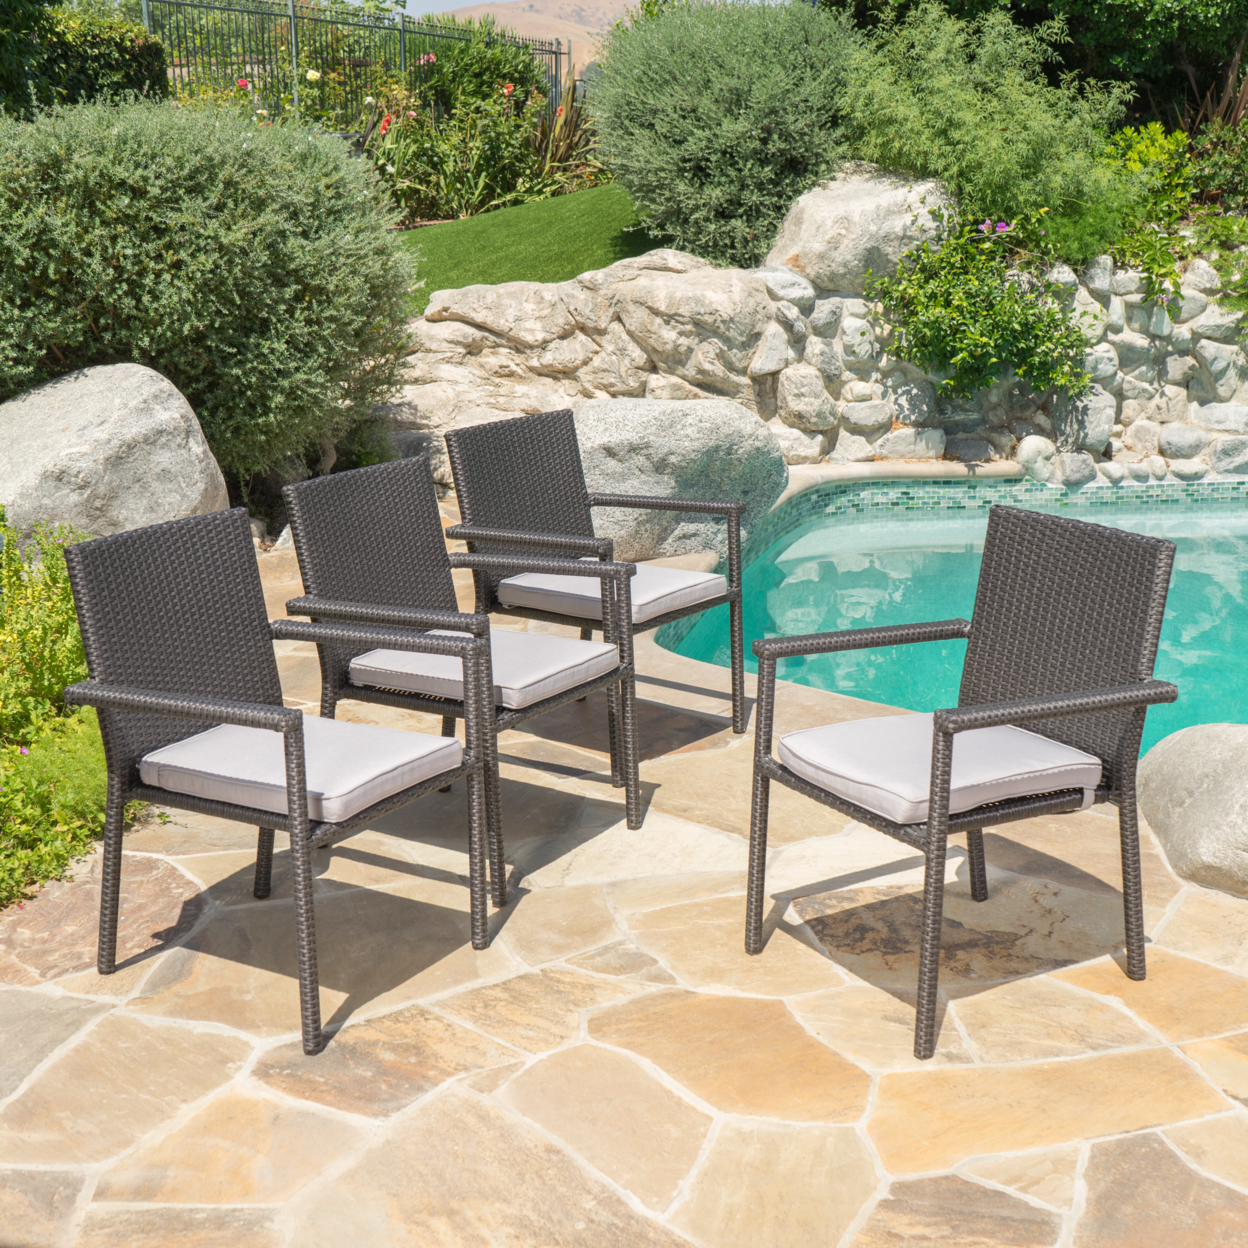 San Tropez Outdoor Dining Chairs With Water Resistant Cushions (Set Of 4) - Gray/Silver